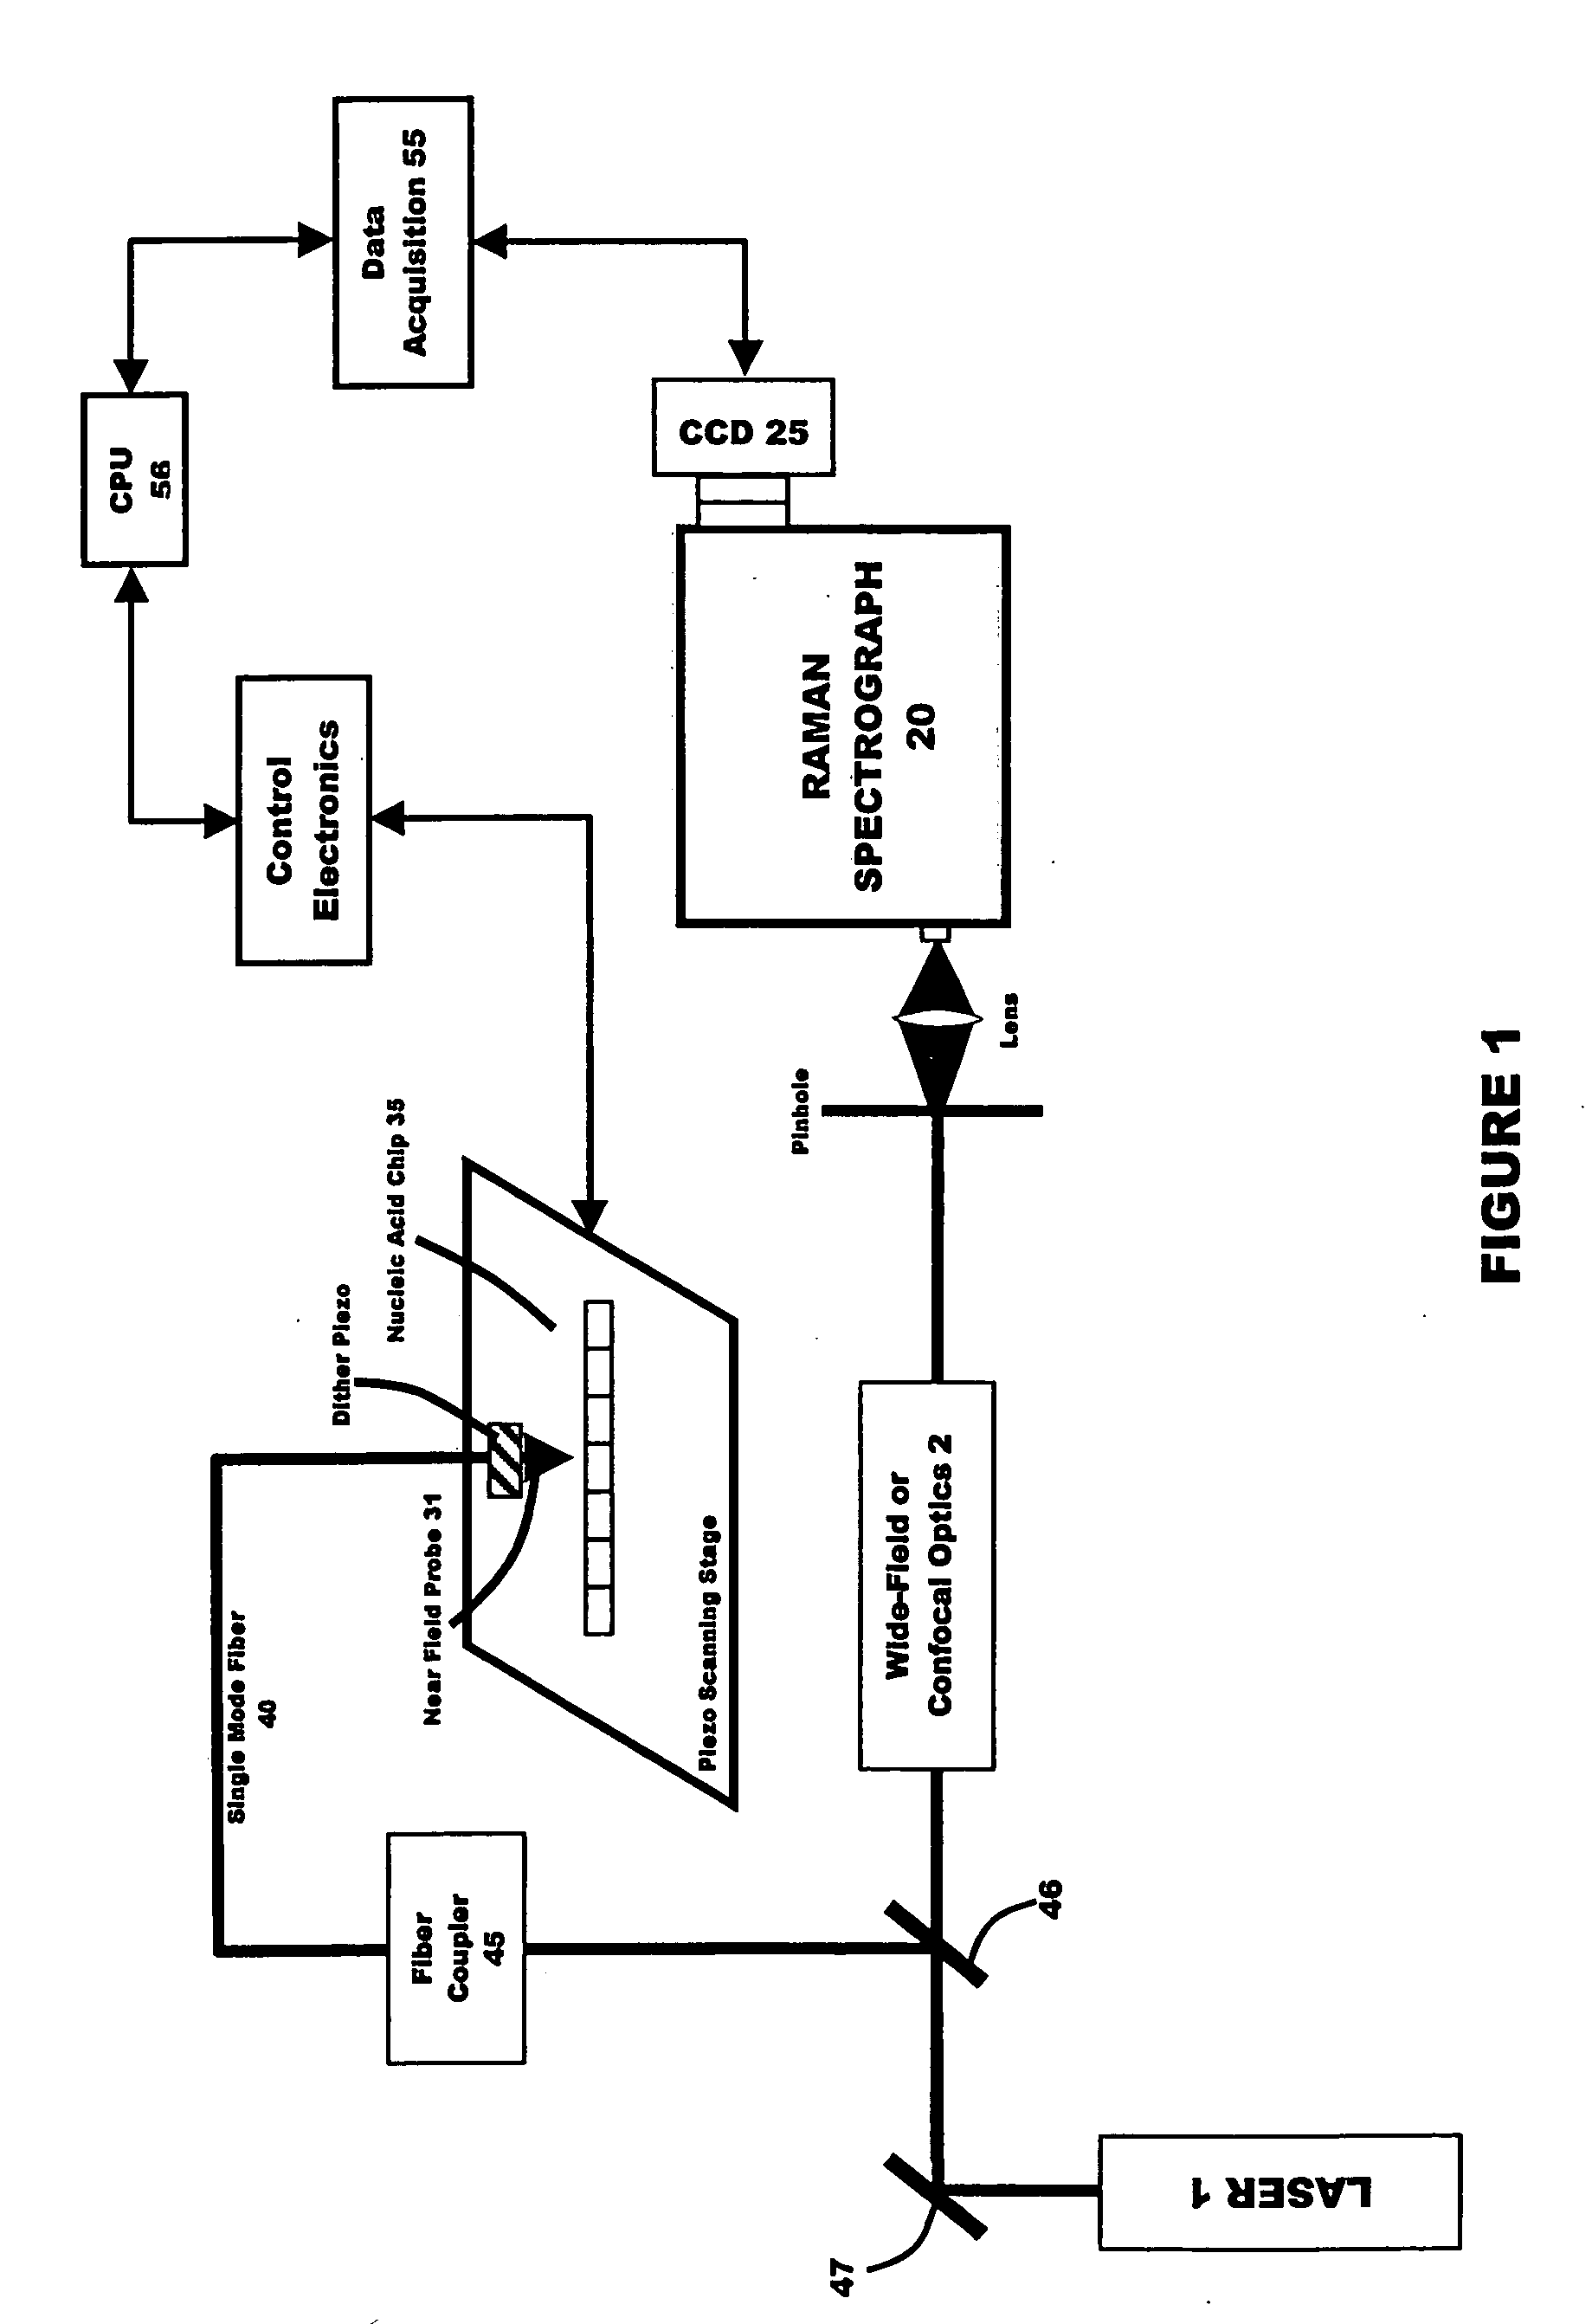 Apparatus and method for the analysis of nucleic acids hydbridization on high density NA chips